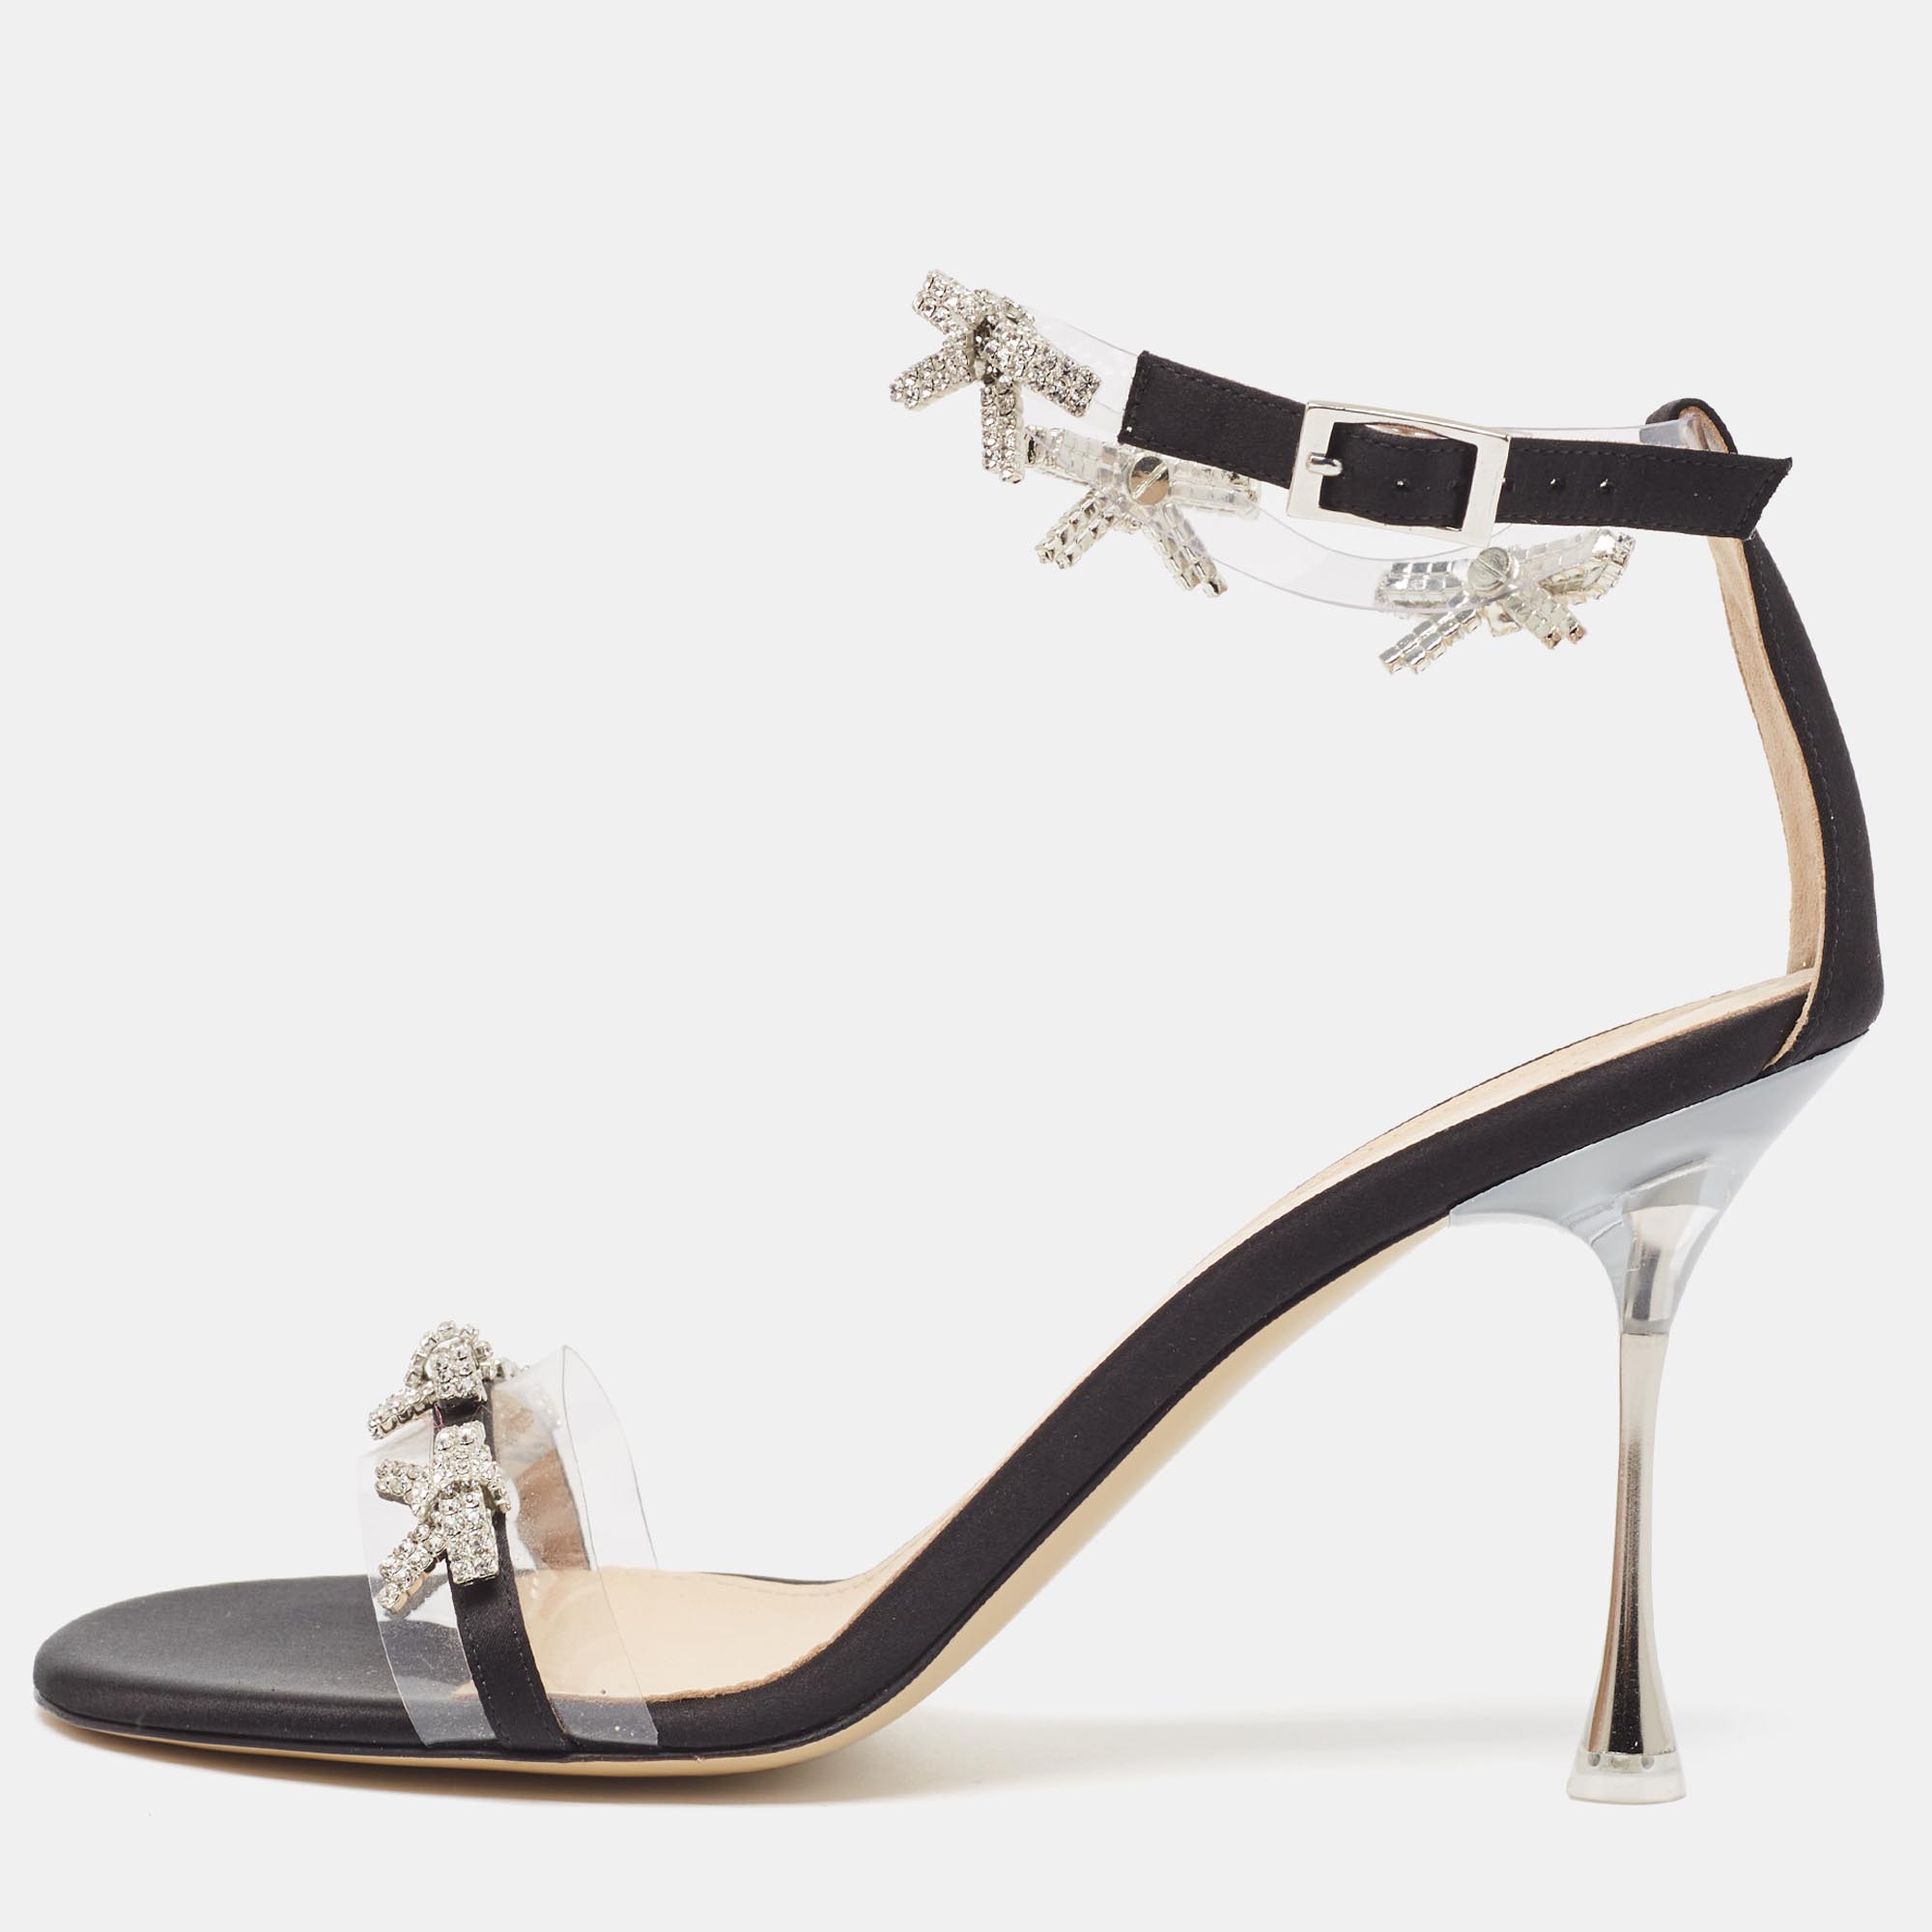 Discover footwear elegance with these Mach and Mach bow sandals. Meticulously designed these heels marry fashion and comfort ensuring you shine in every setting.